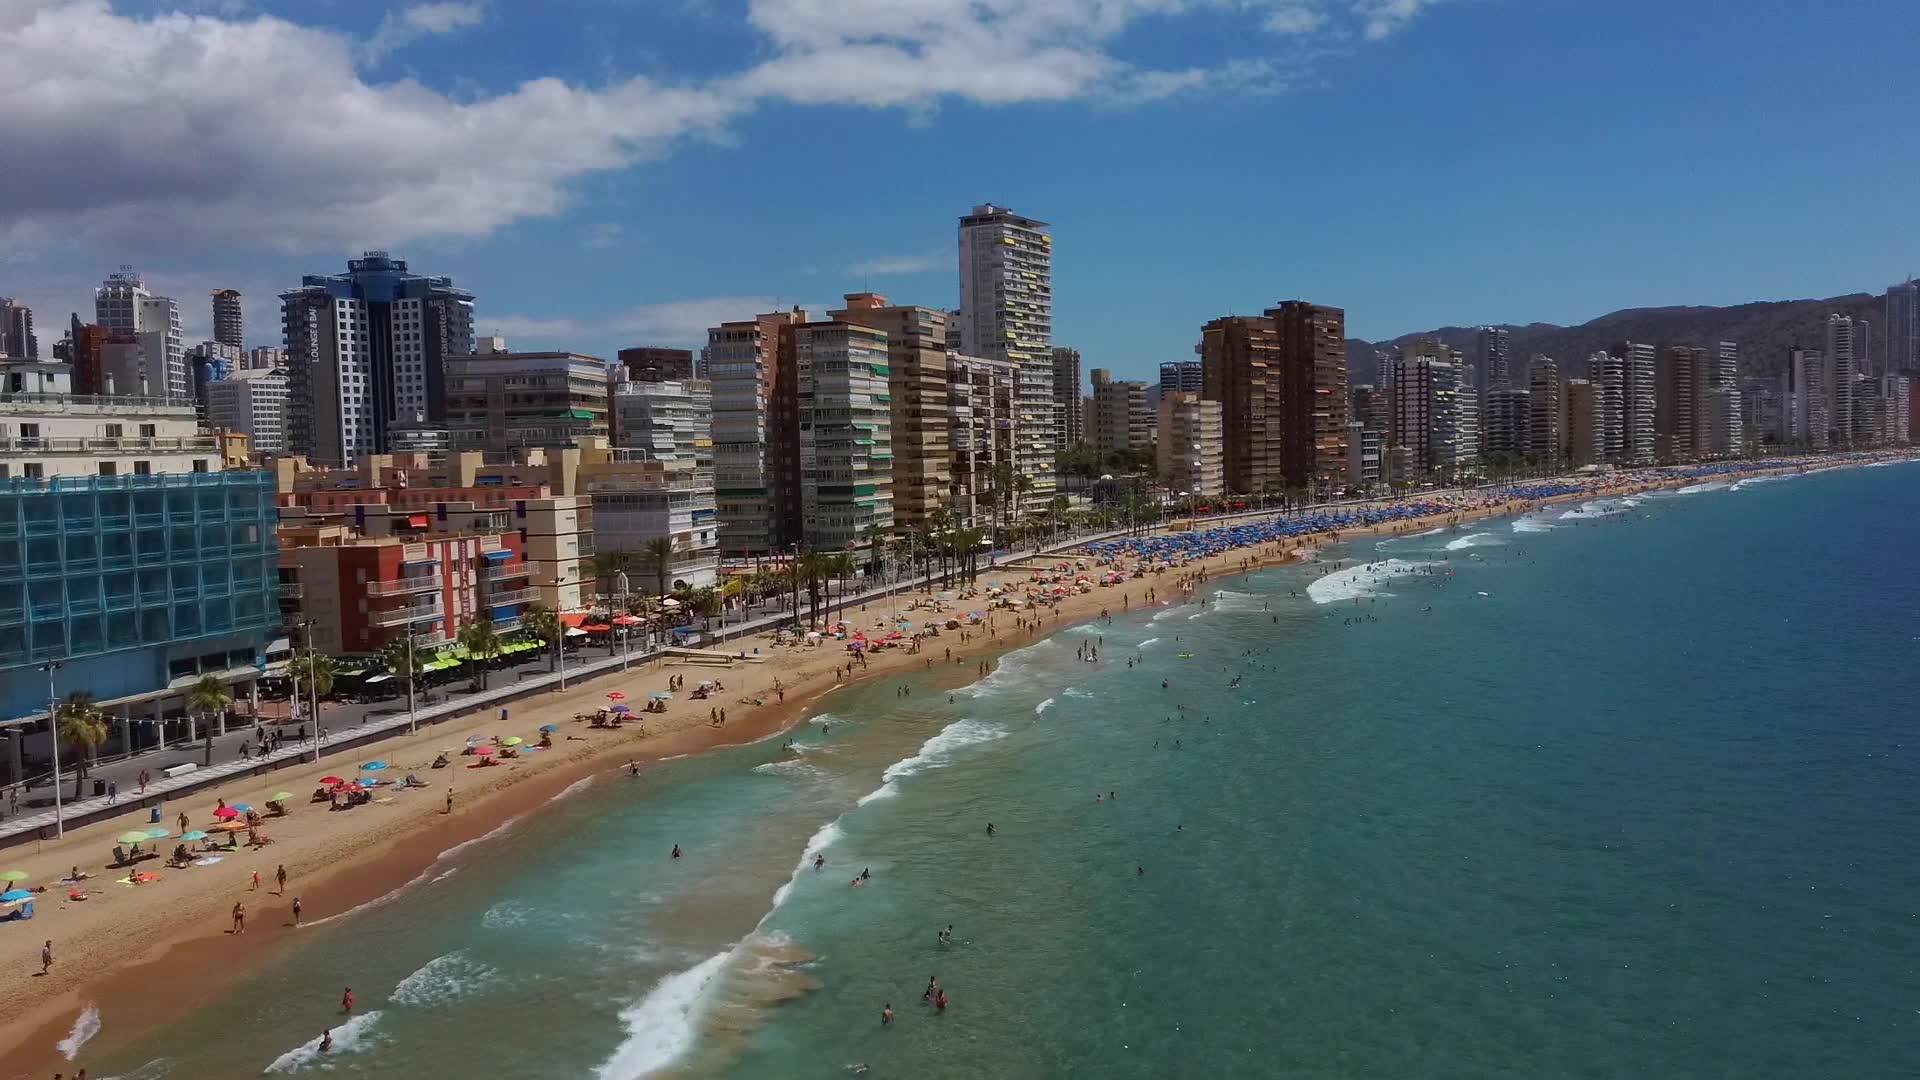 Benidorm Hotels See 85 Per Cent Drop In July For Overnight Stays On Spain  S Costa Blanca